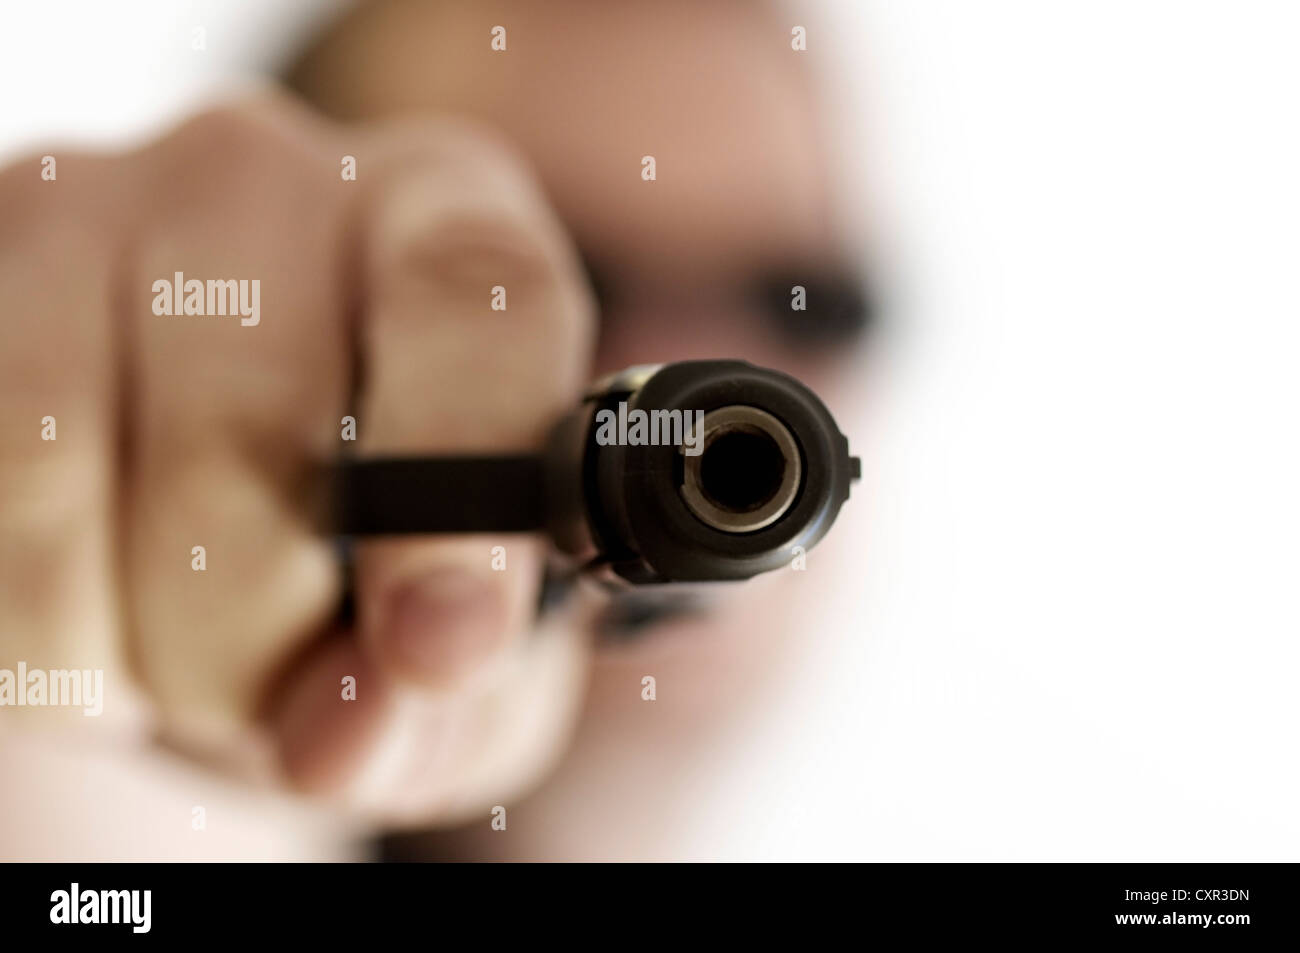 Gun being pointed at the viewer. Stock Photo